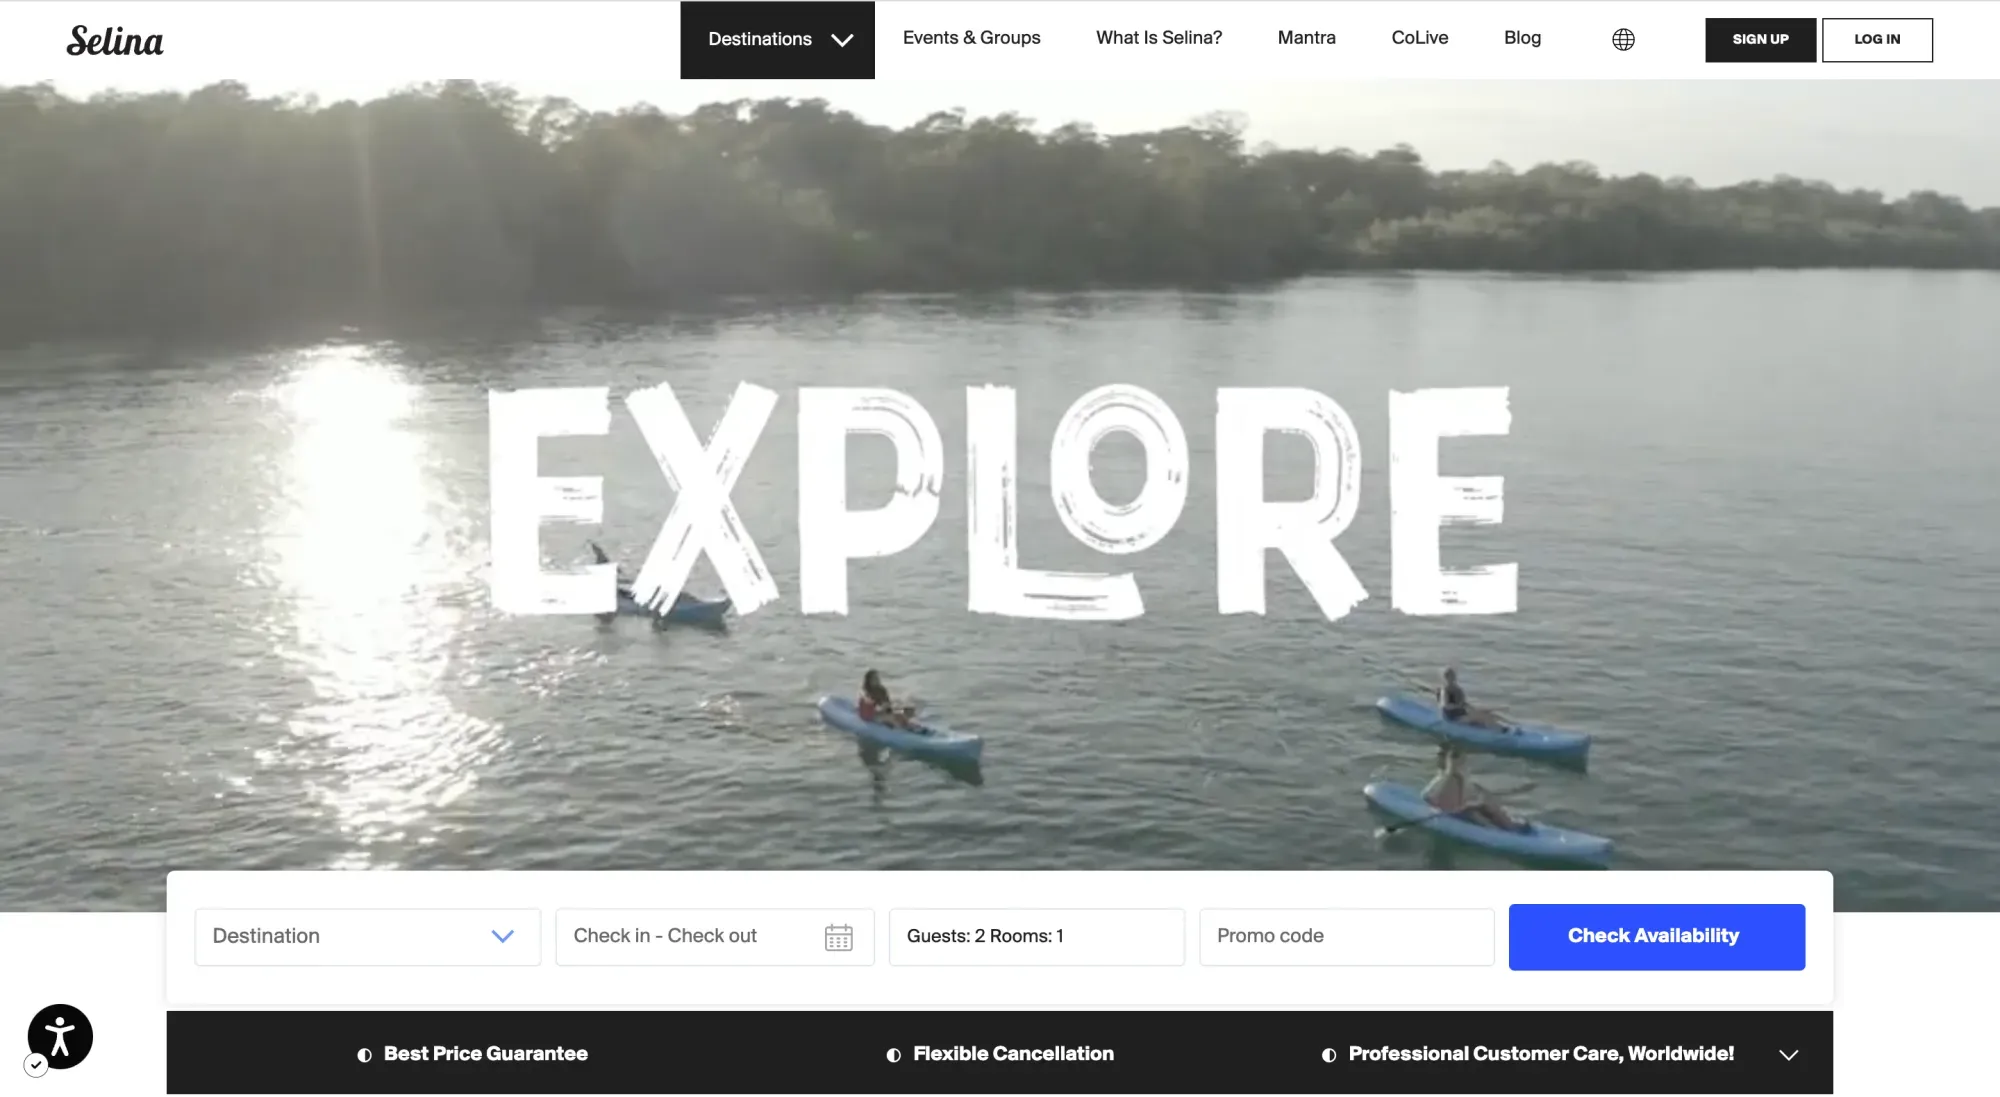 selina, a website for remote work travel programs